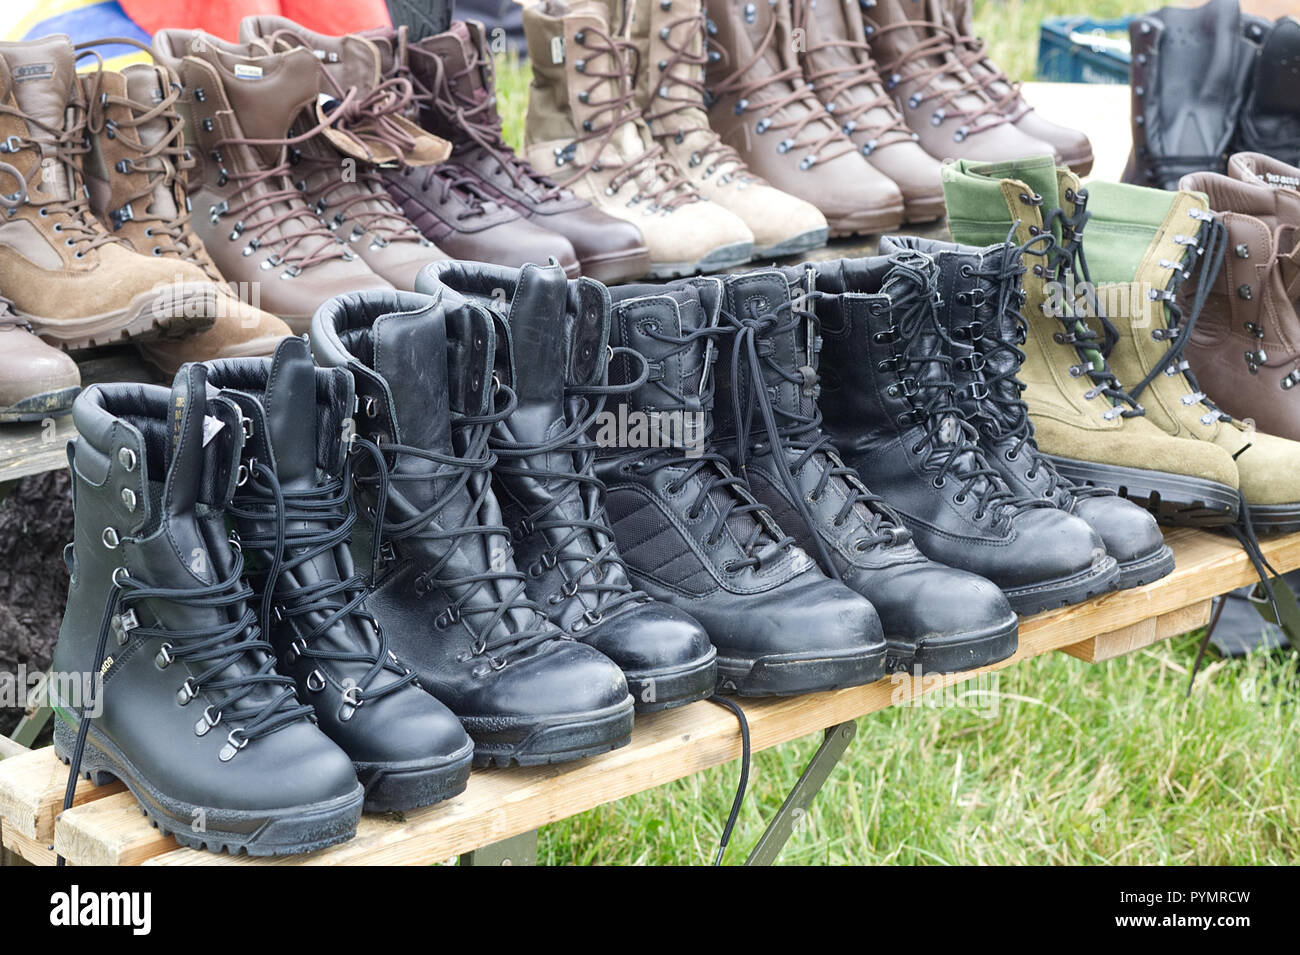 Regulation Army Boots on sale Stock Photo - Alamy